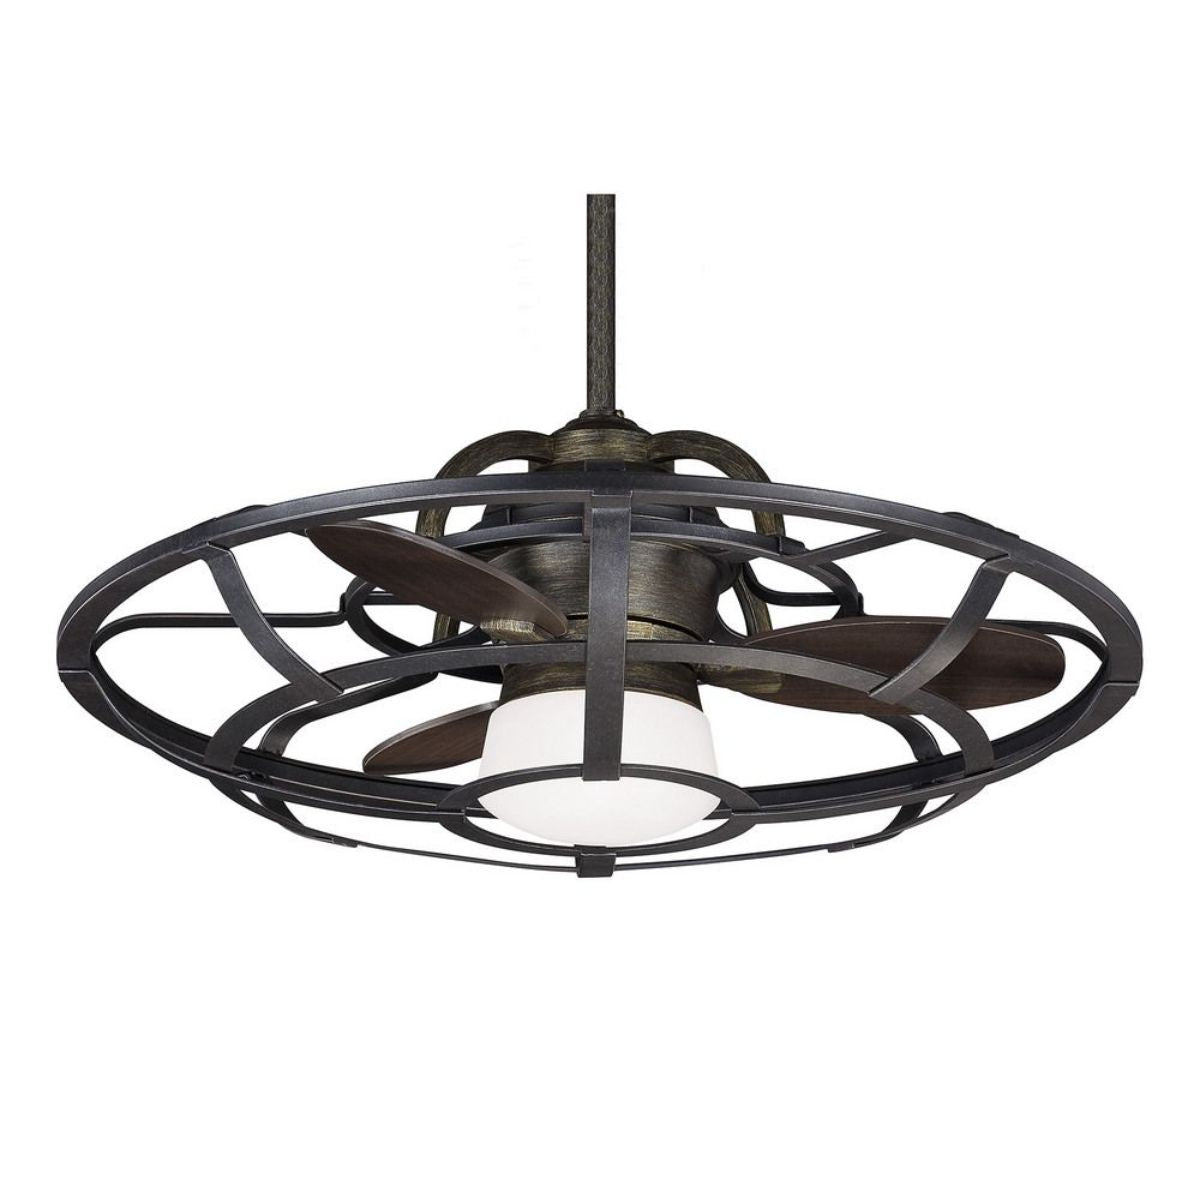 Alsace 30 Inch Outdoor Chandelier Ceiling Fan With Light And Remote, Reclaimed Wood Finish - Bees Lighting